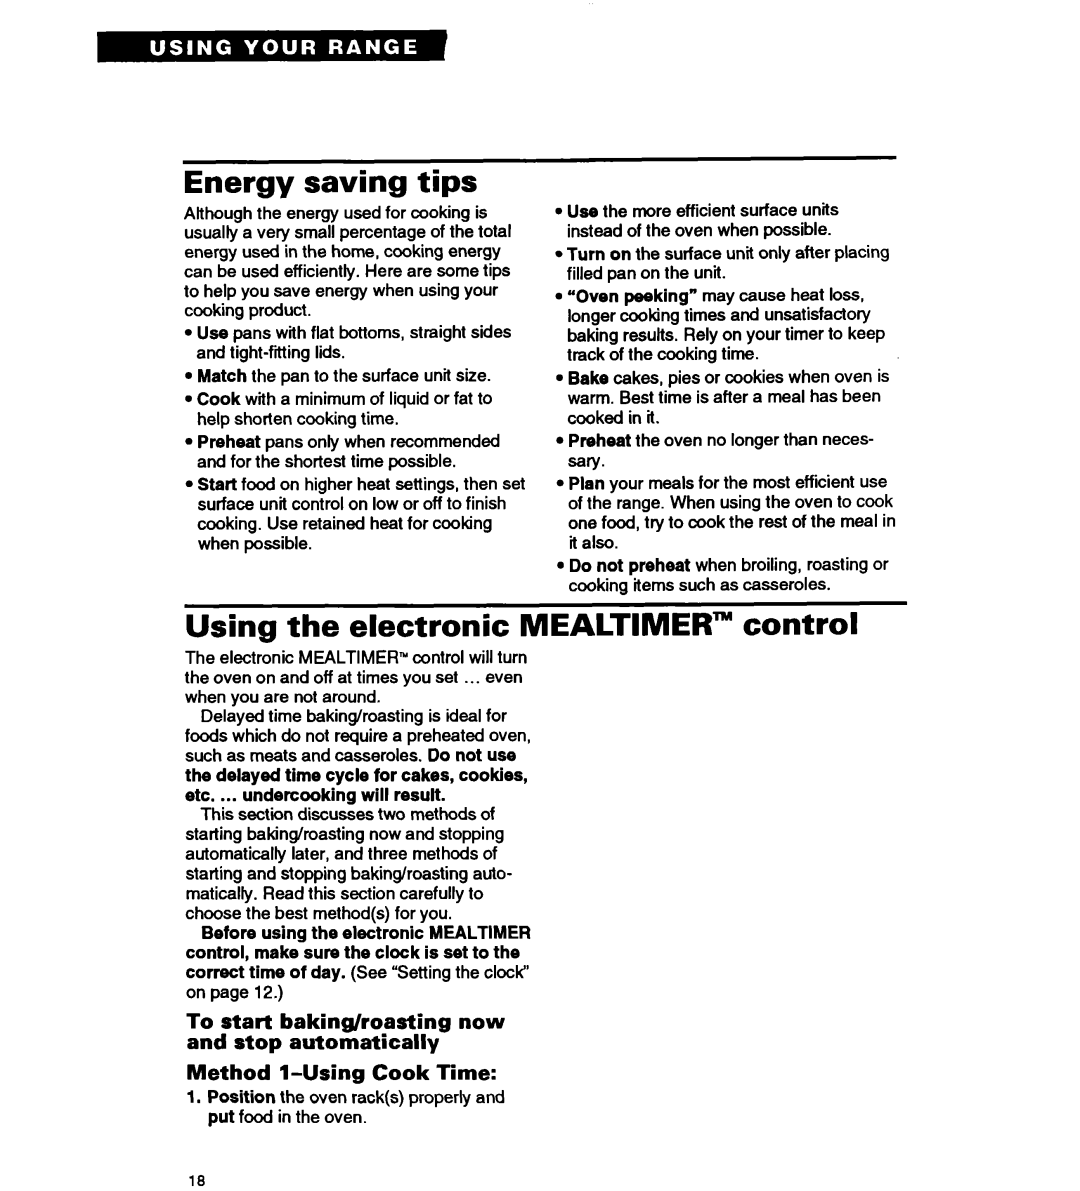 Whirlpool RS677PX Energy saving tips, Using the electronic MEALTIMER” control, Method l-UsingCook Time 